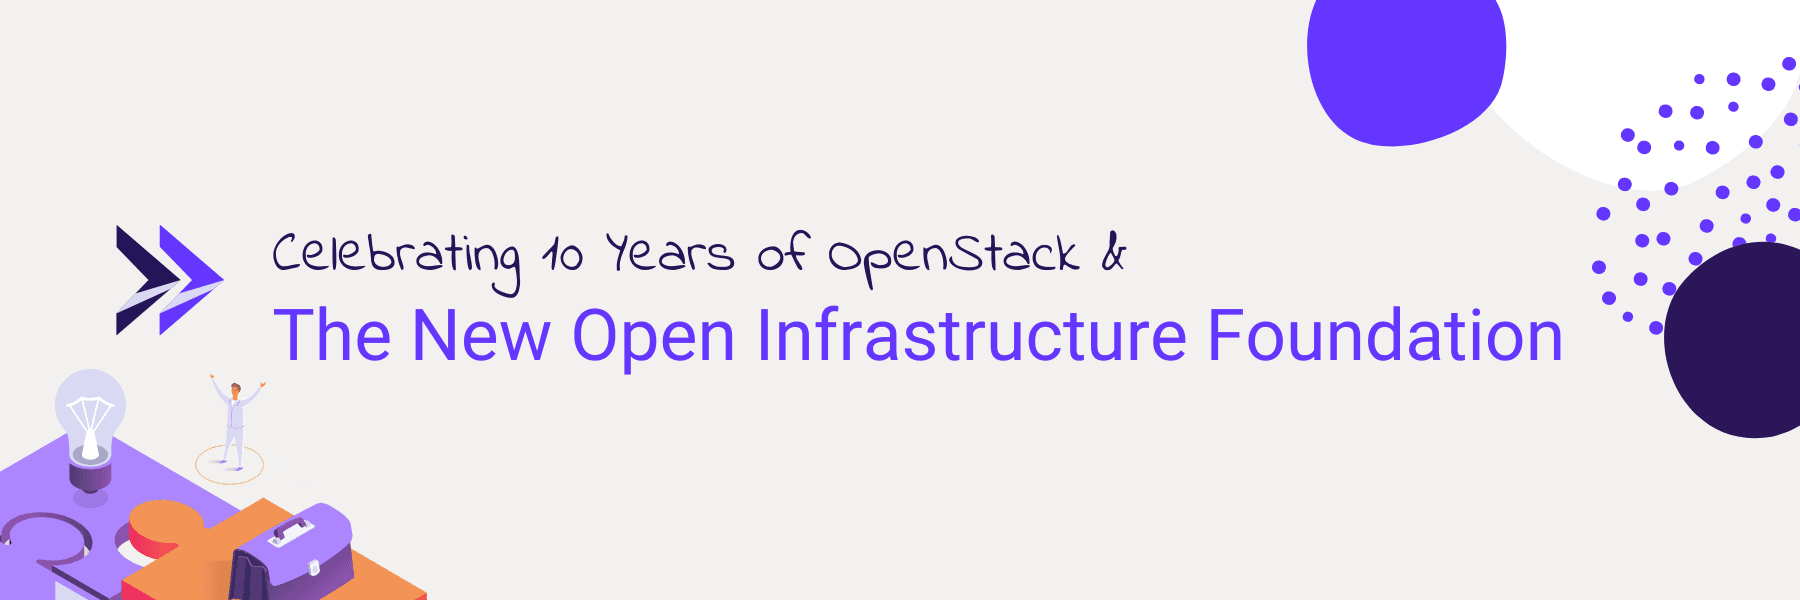 Celebrating 10 Years of OpenStack and the new Open Infrastructure Foundation